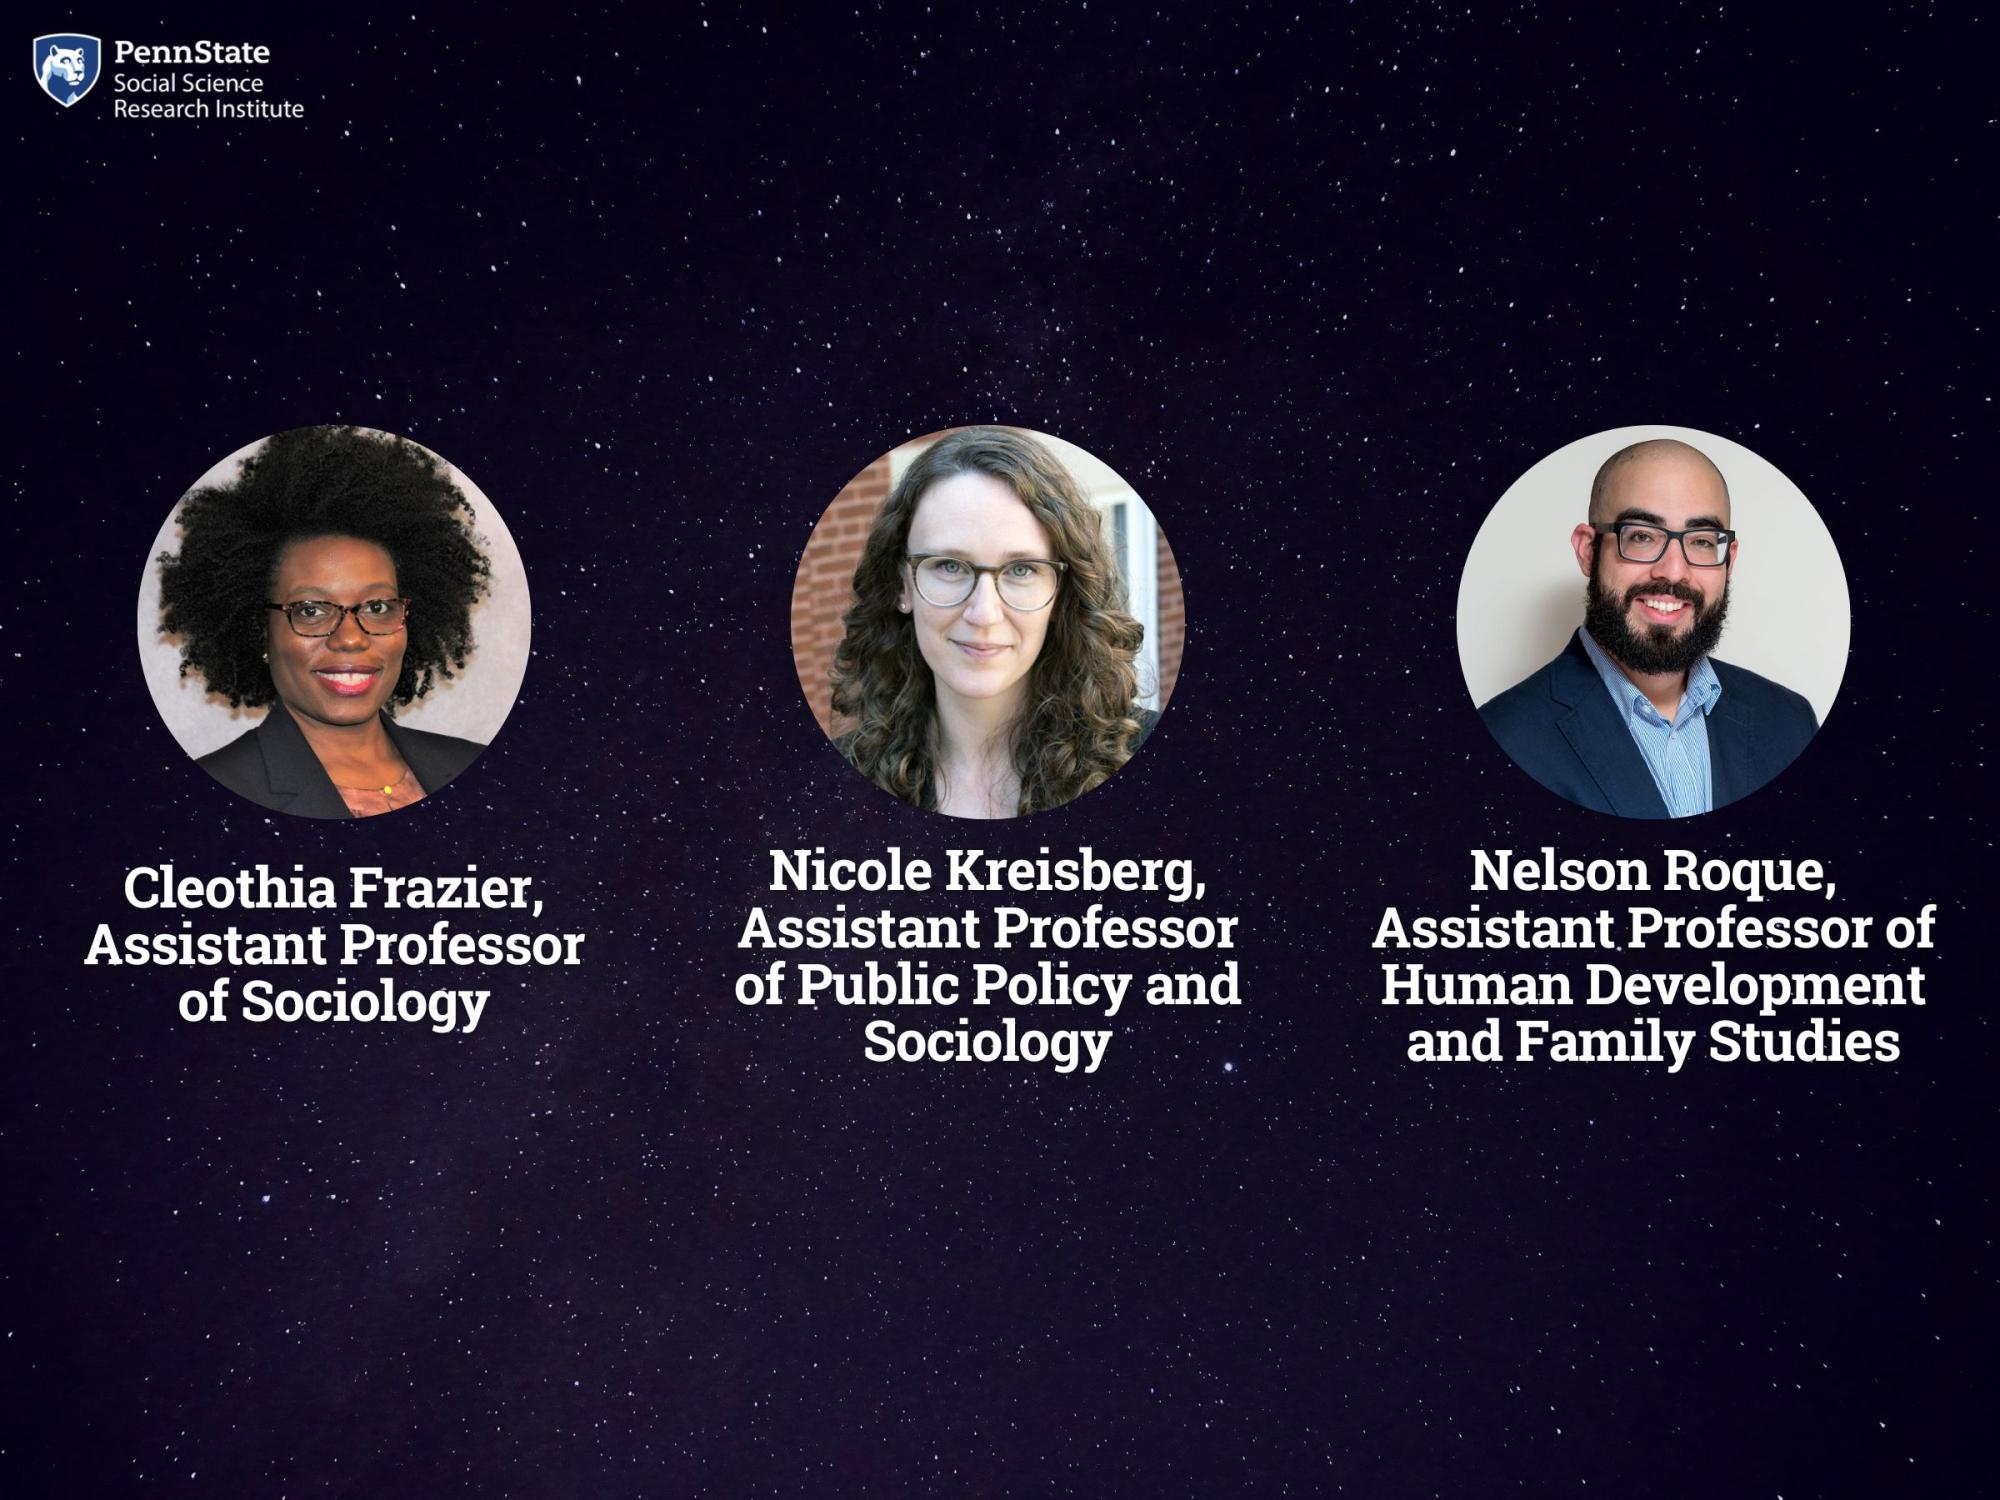 The Social Science Research Institute welcomes three new co-funded faculty members: Cleothia Franzier, Nicole Kriesberg and Nelson Roque-Social Science Research Institute welcomes three new co-funded faculty members